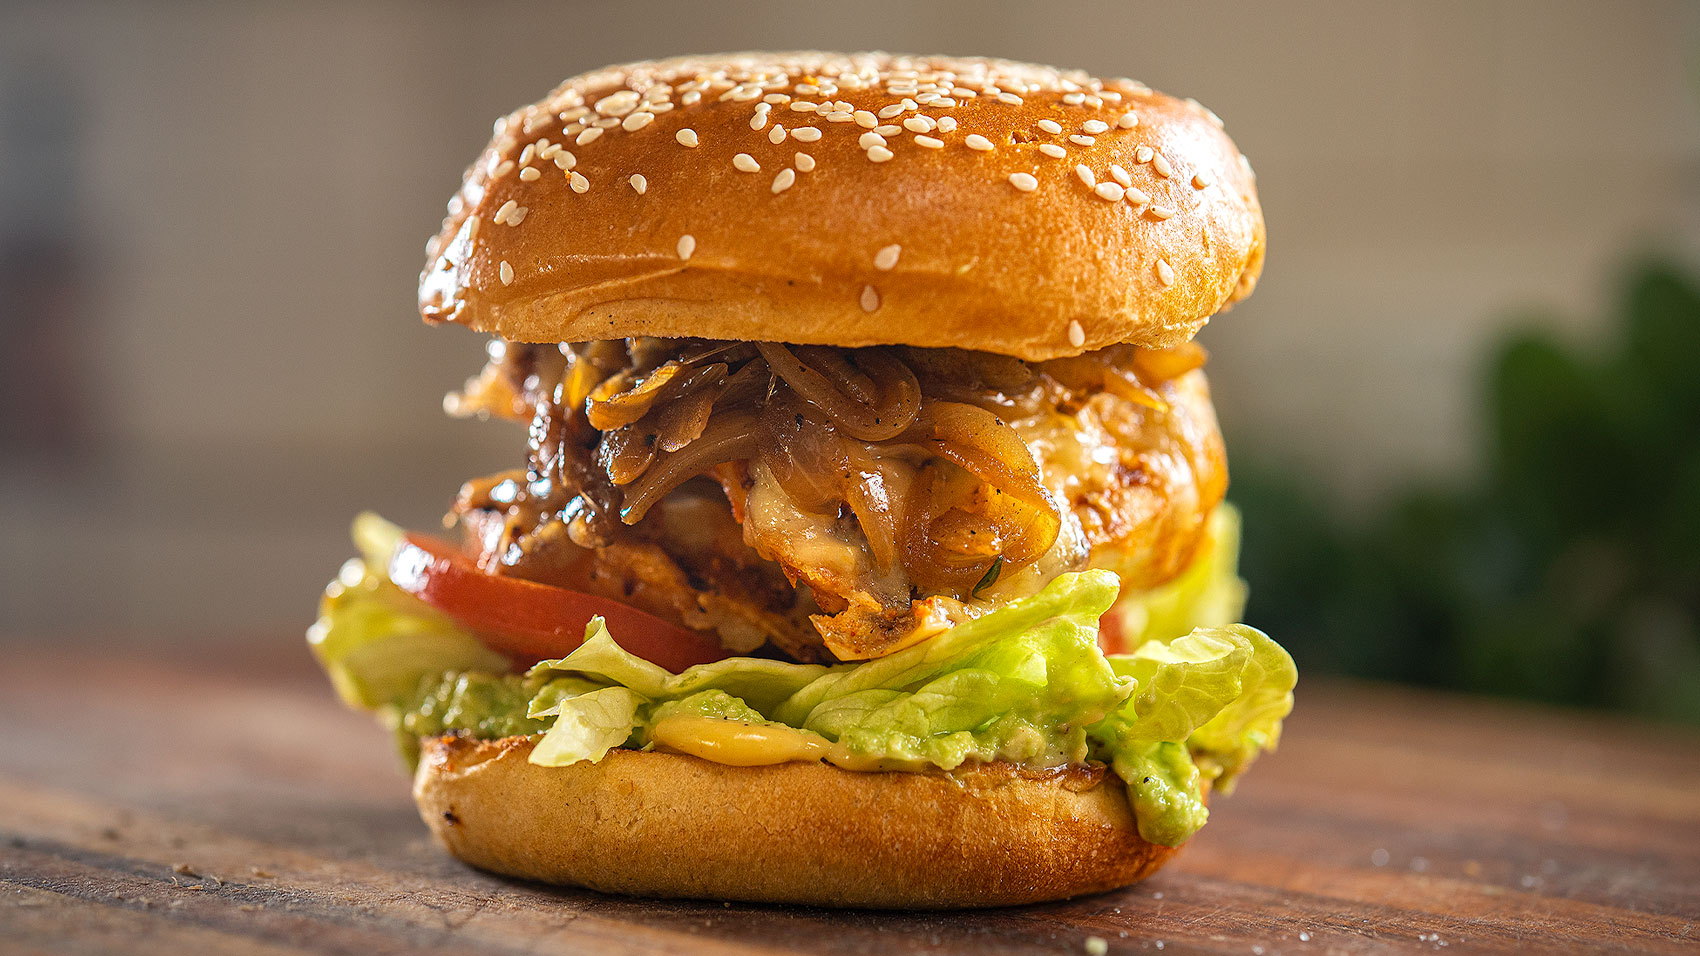 Garlic & Chili BBQ Chicken Burgers - The Juiciest Grilled Burger Recipe! -  Easy Meals with Video Recipes by Chef Joel Mielle - RECIPE30